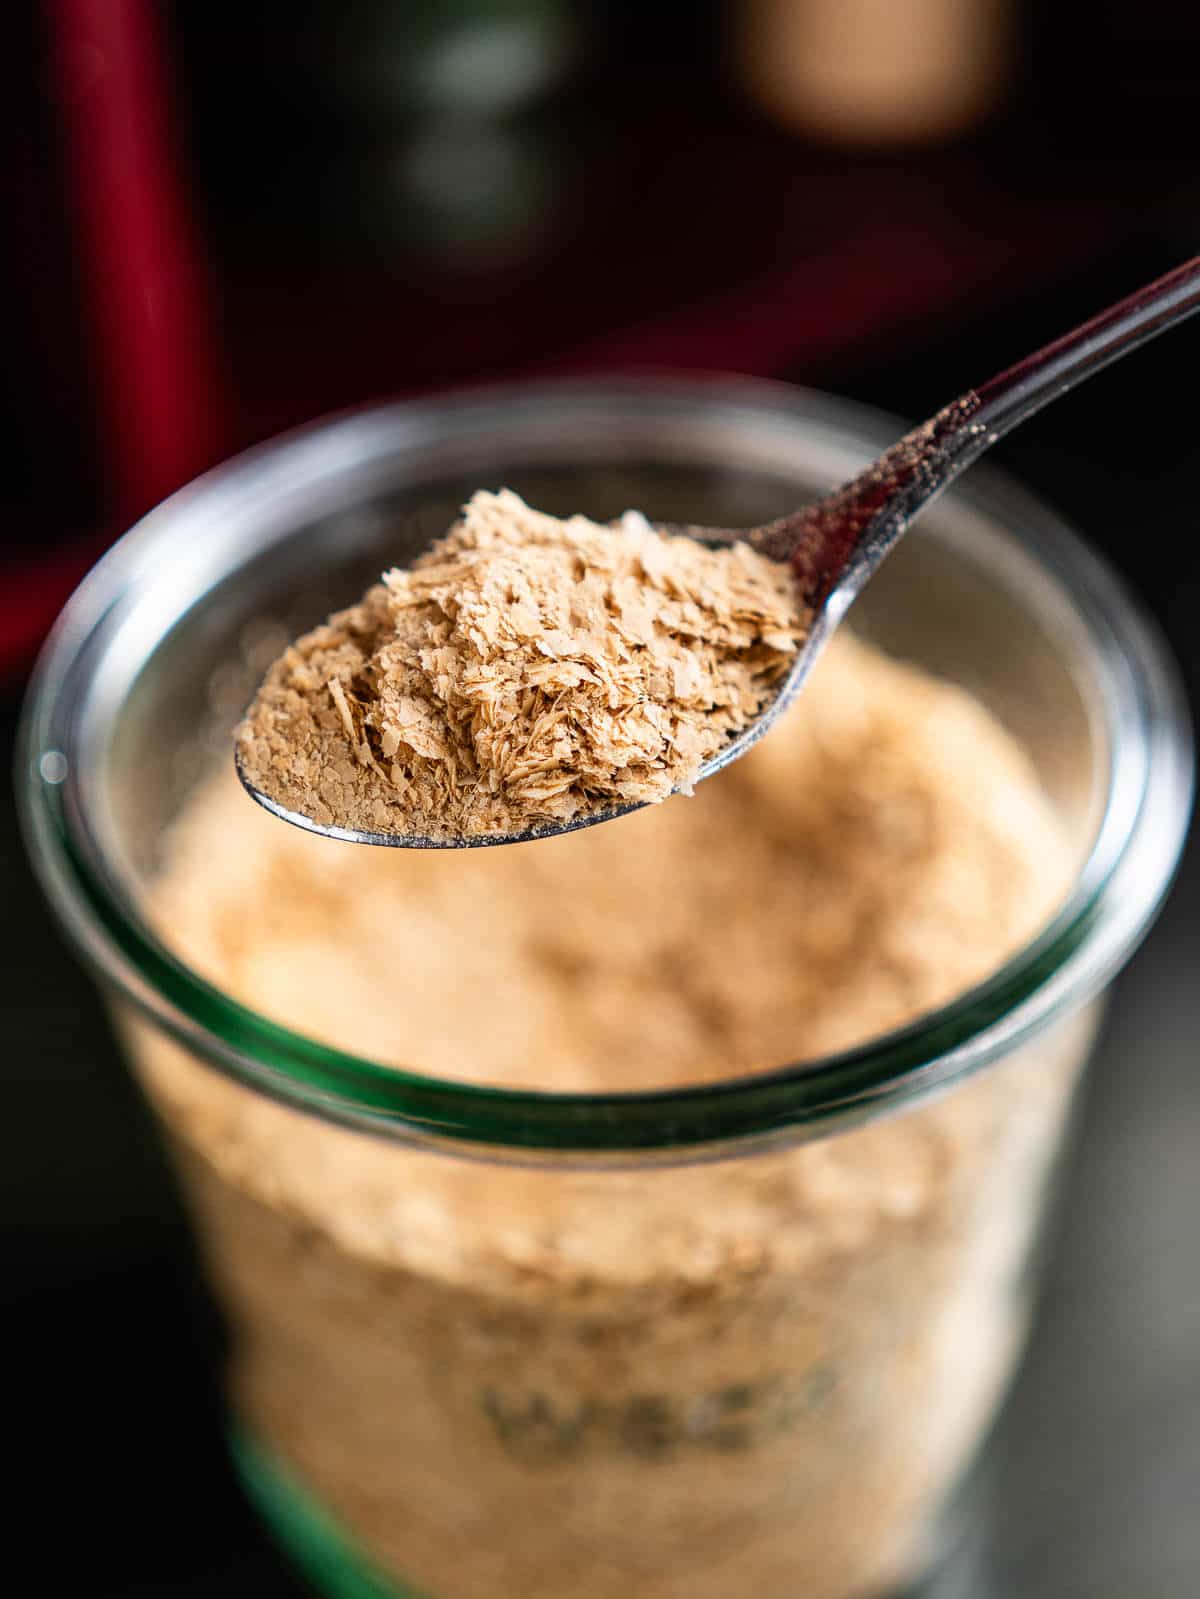 A spoonful of nutritional yeast flakes held above a glass jar filled with more of the flakes, showcasing a close-up view that highlights the texture of the yeast.